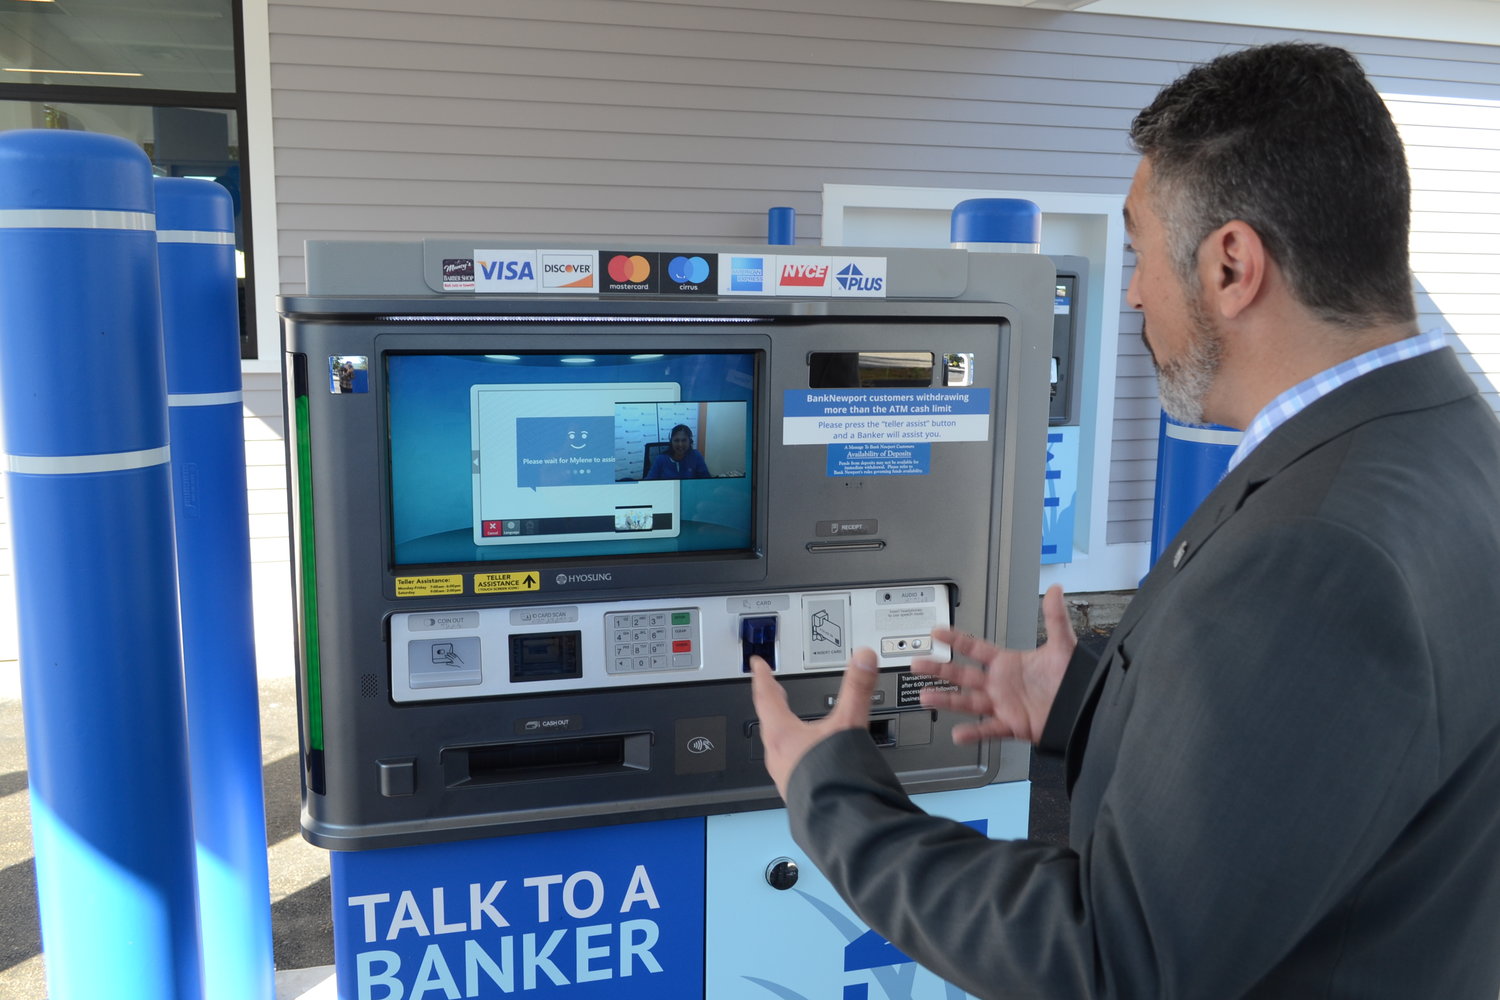 Victor Correia, Vice President and branch sales manager of BankNewport’s Warren location, speaks with Myleen from the bank’s Middletown call center via one of the bank’s new PTMs (personal teller machines), which performs many functions above and beyond a traditional drive-up ATM.